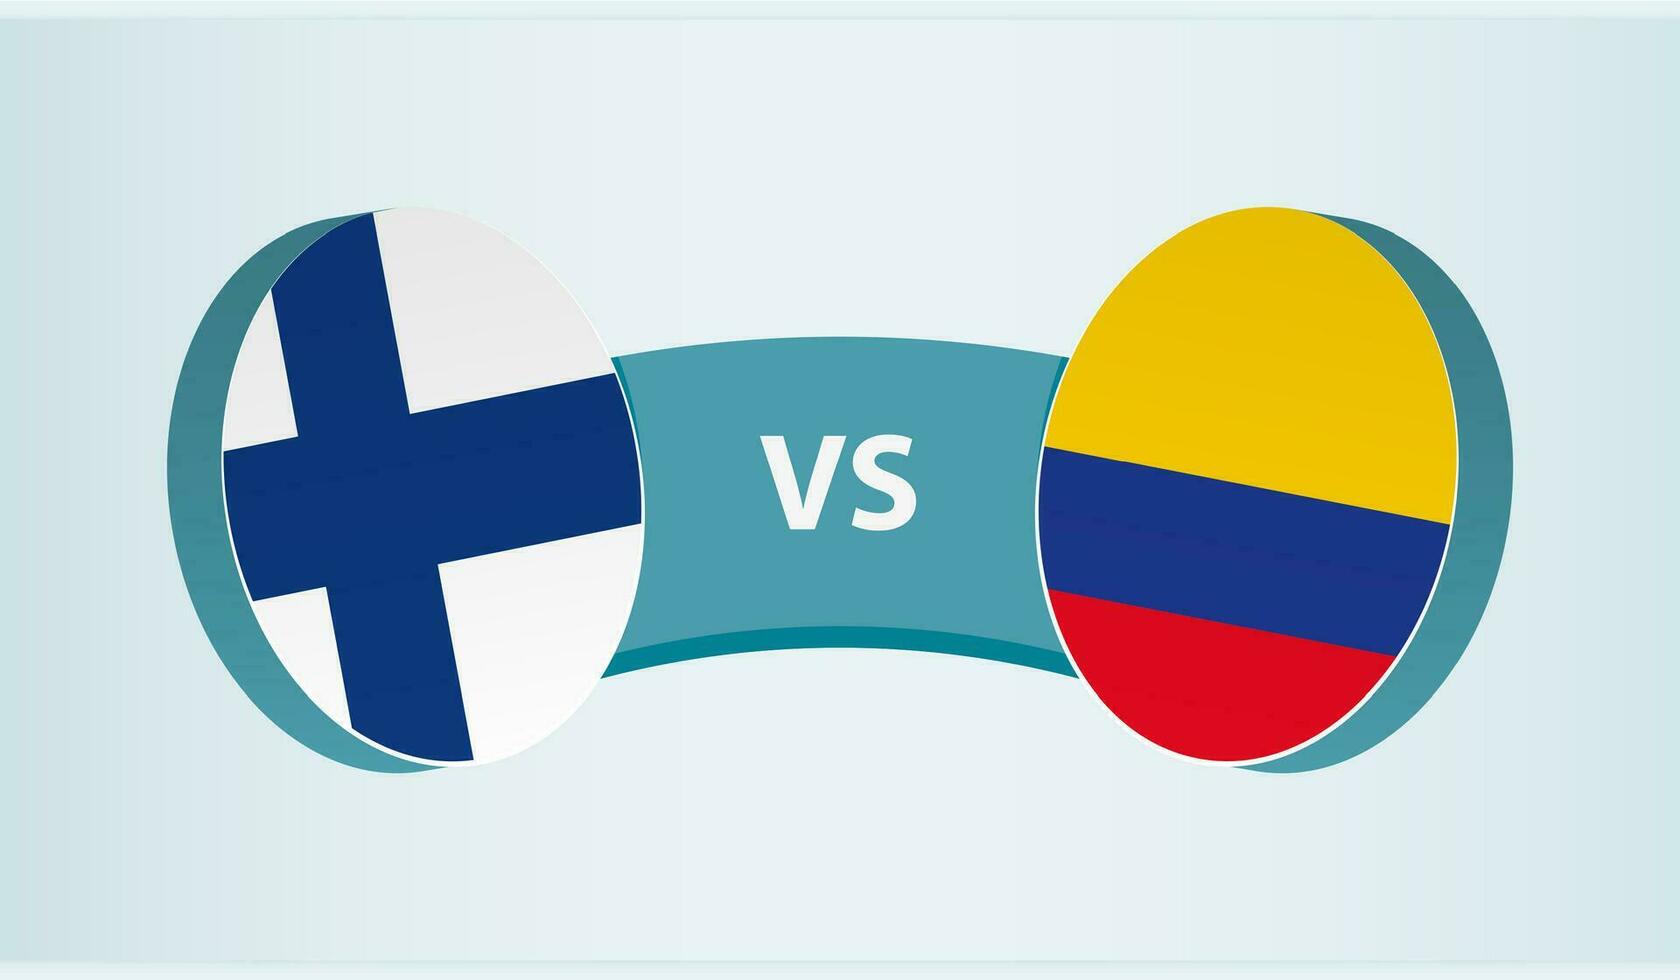 Finland versus Colombia, team sports competition concept. vector